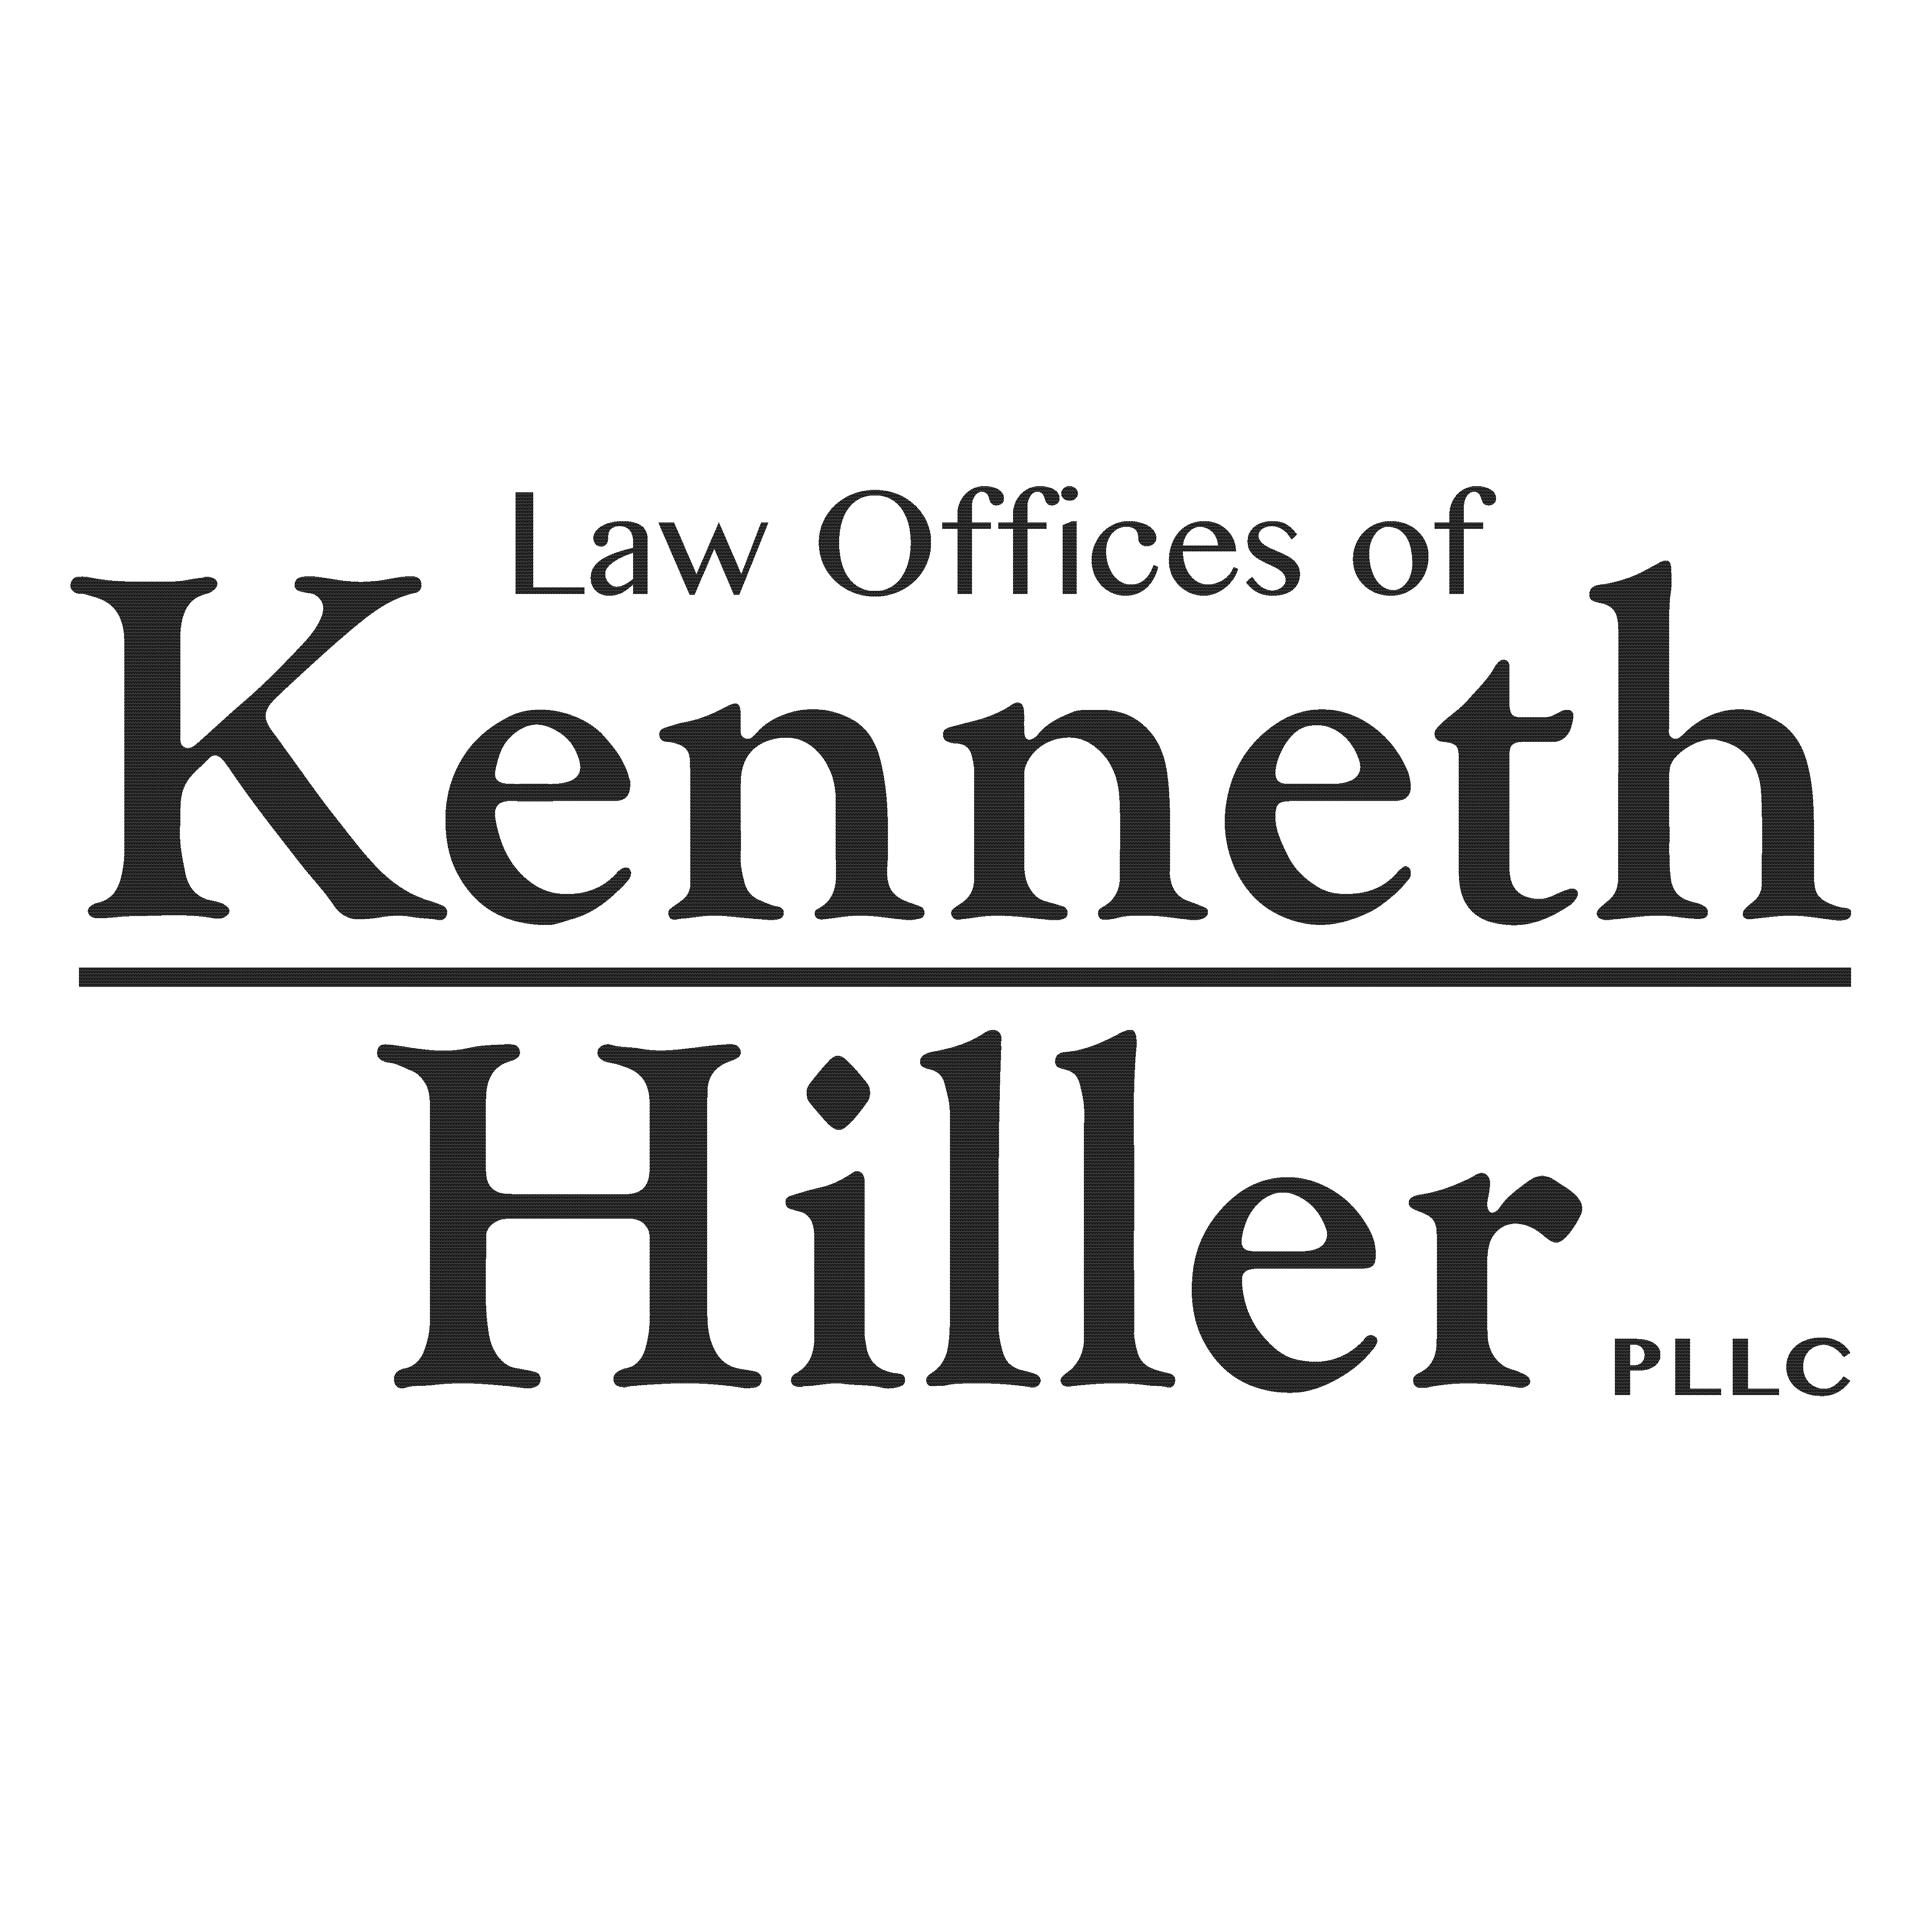 The Law Offices of Kenneth Hiller PLLC